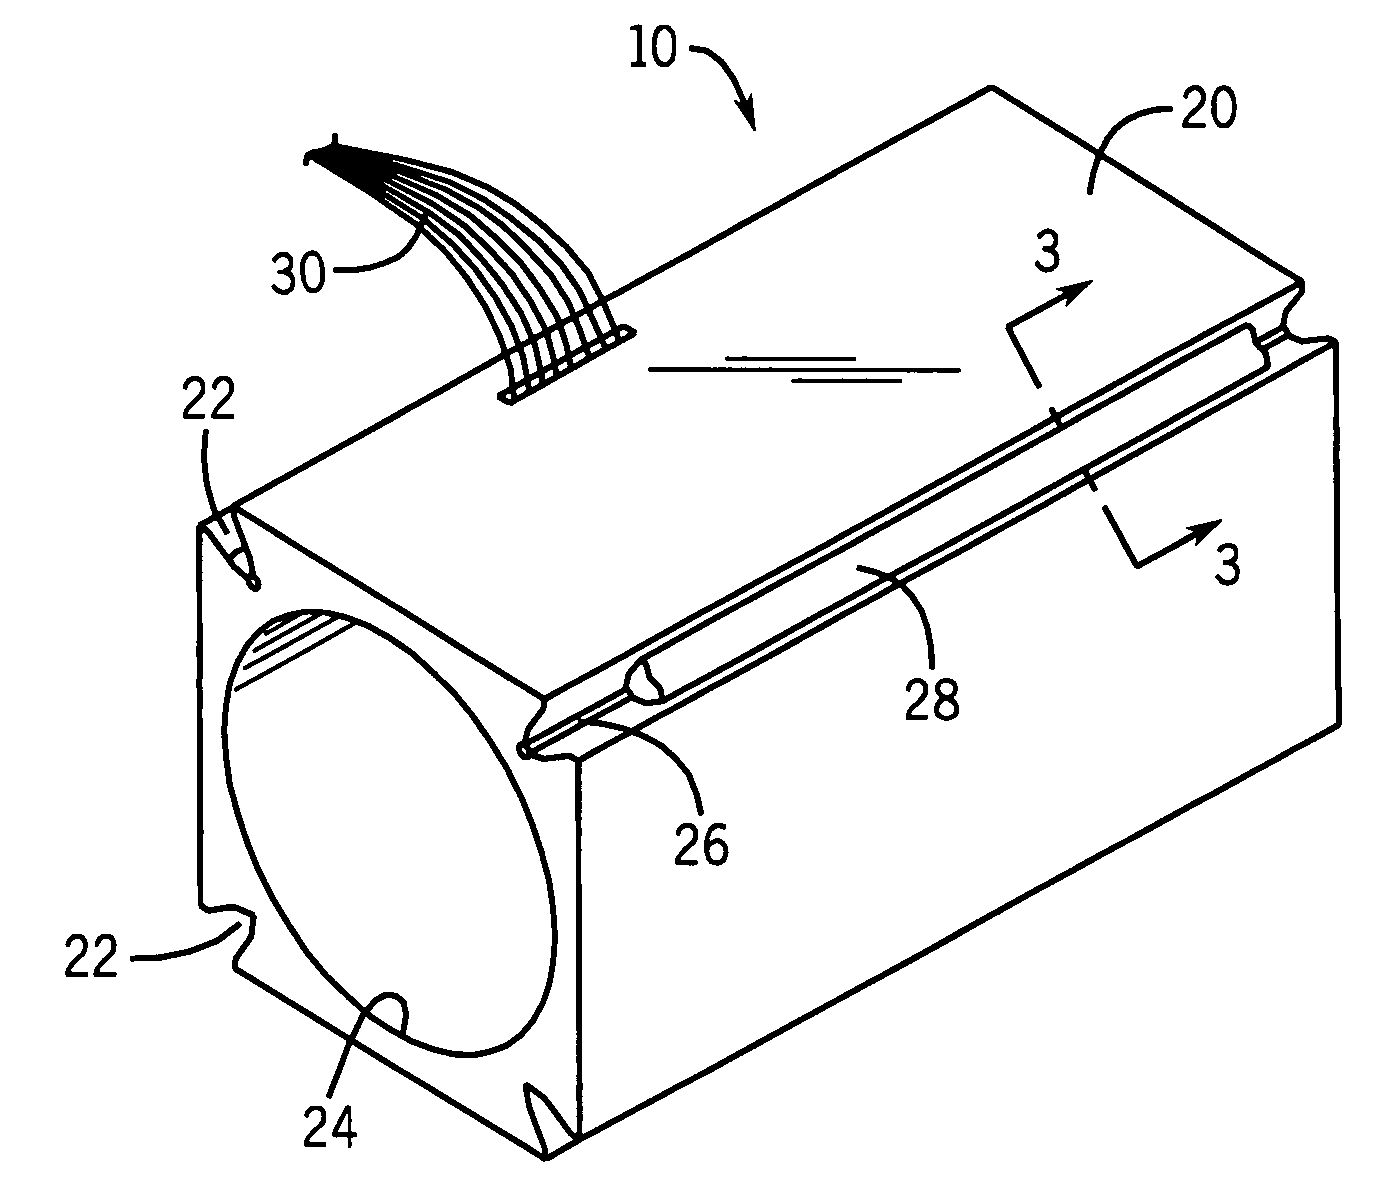 Grooved electrode and wireless microtransponder system